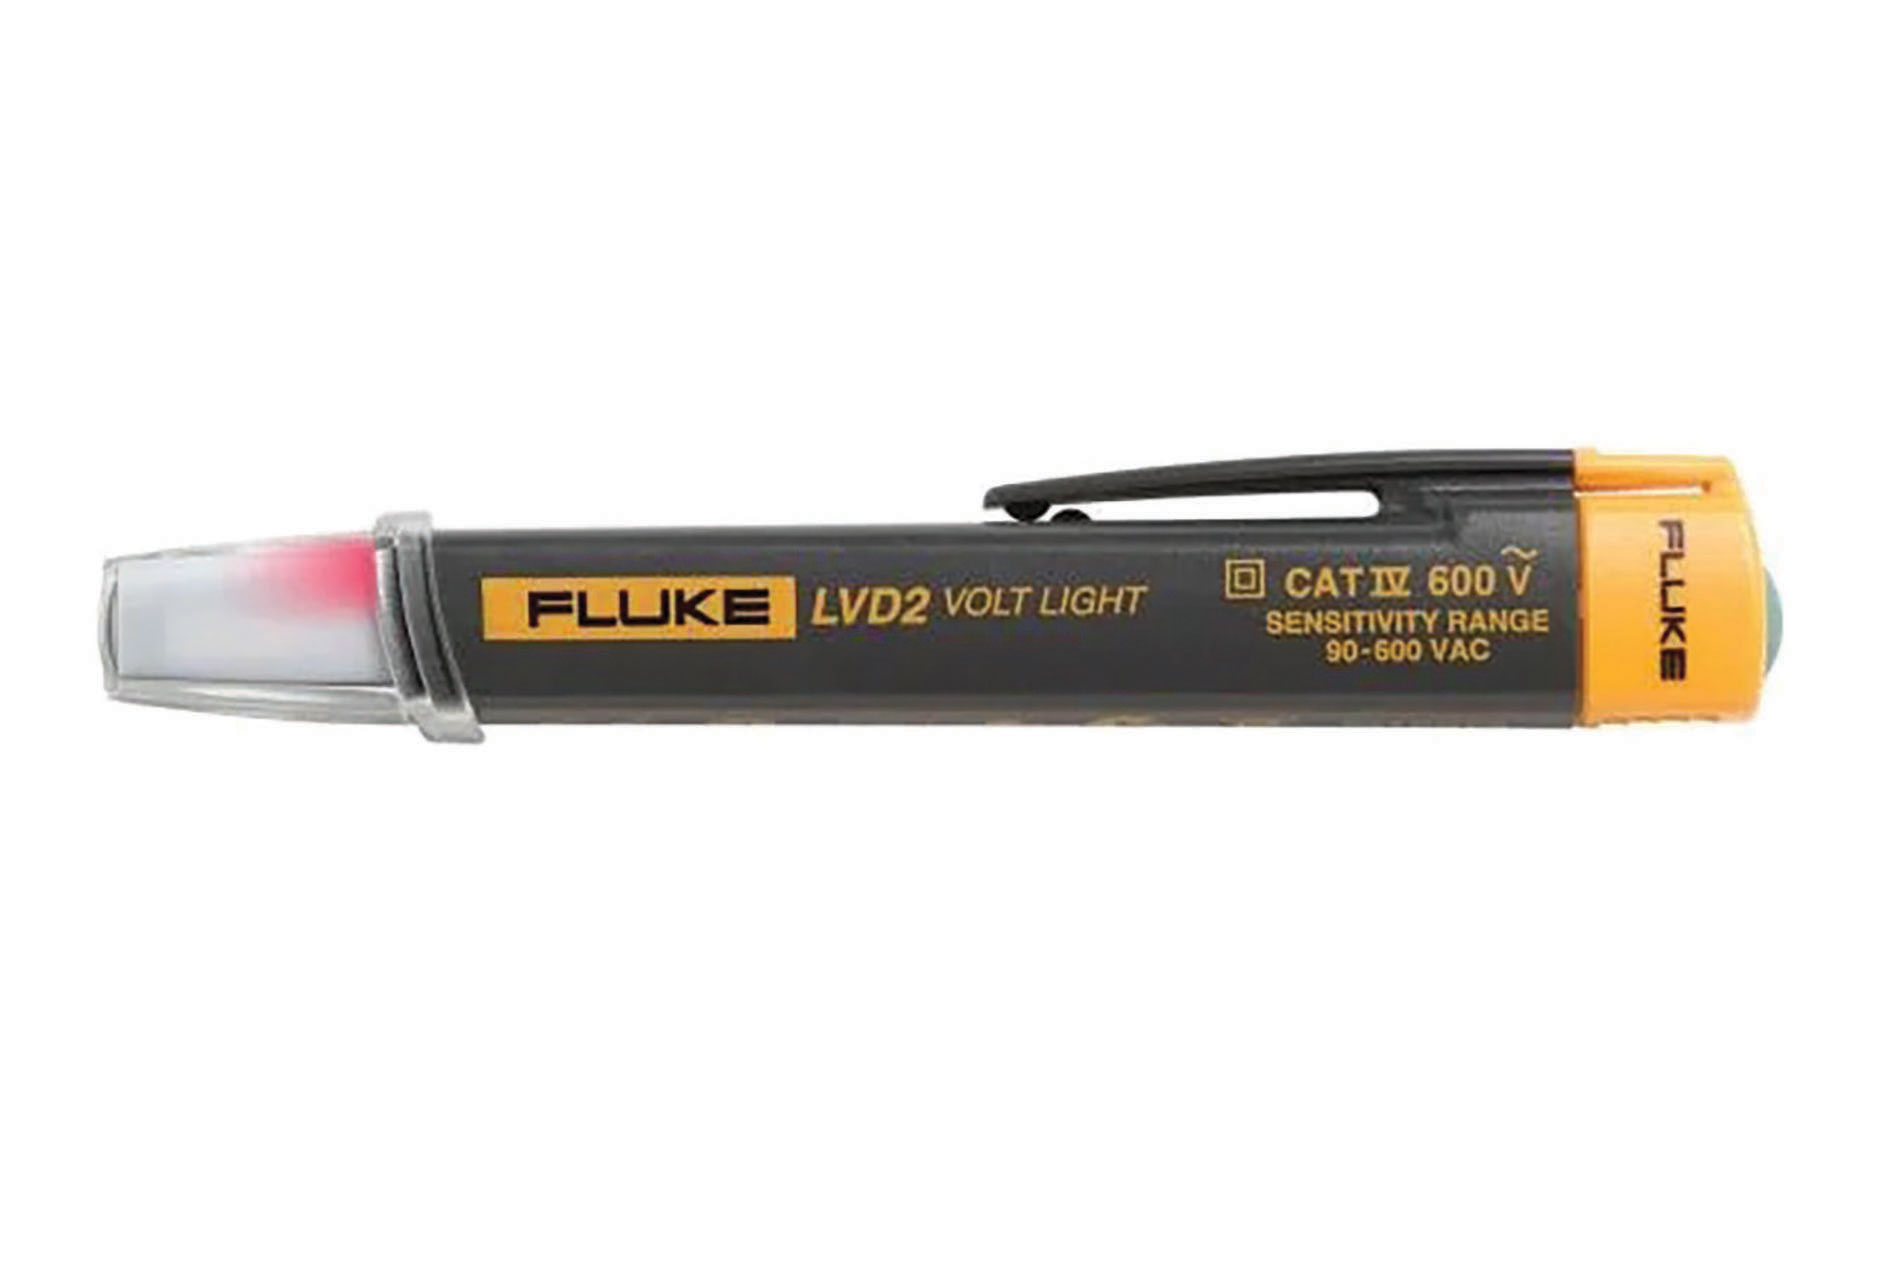 Gray and yellow voltage tester. Image by Fluke.